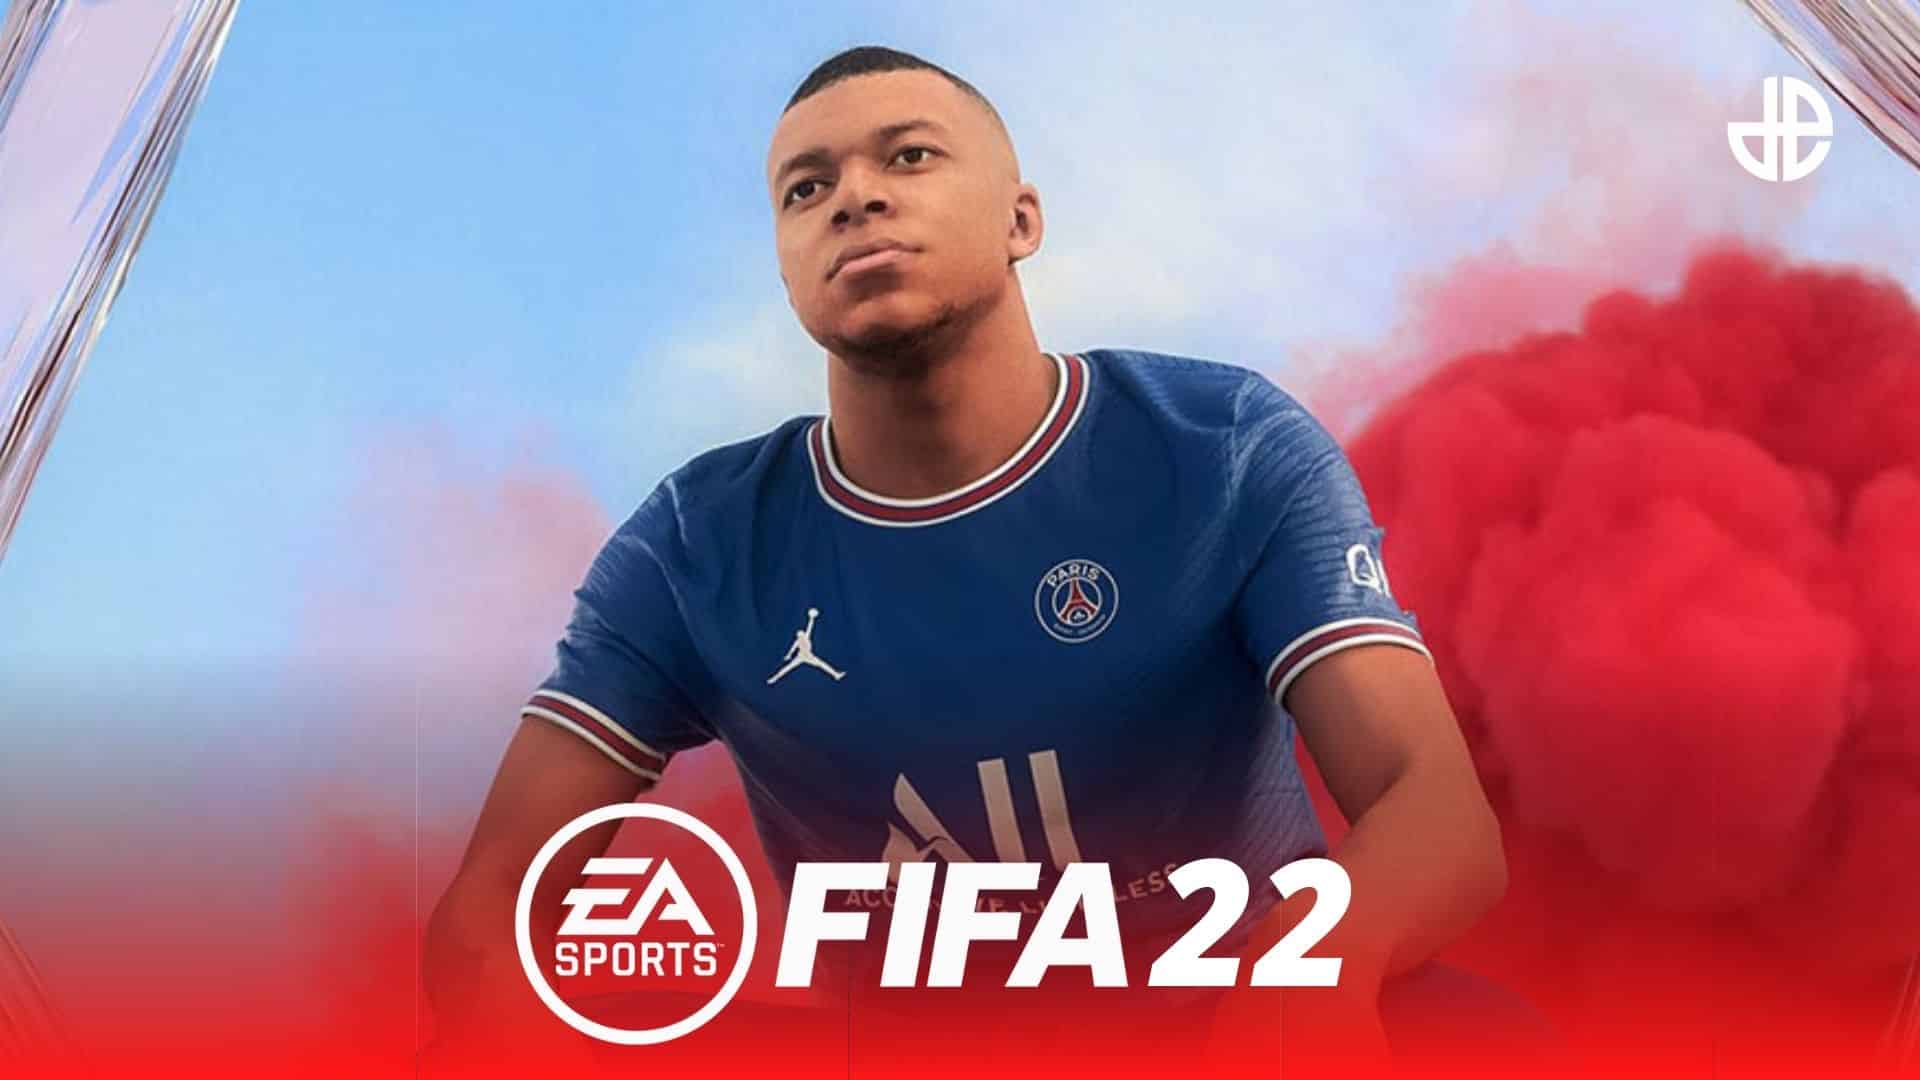 FIFA 22 with mbappe